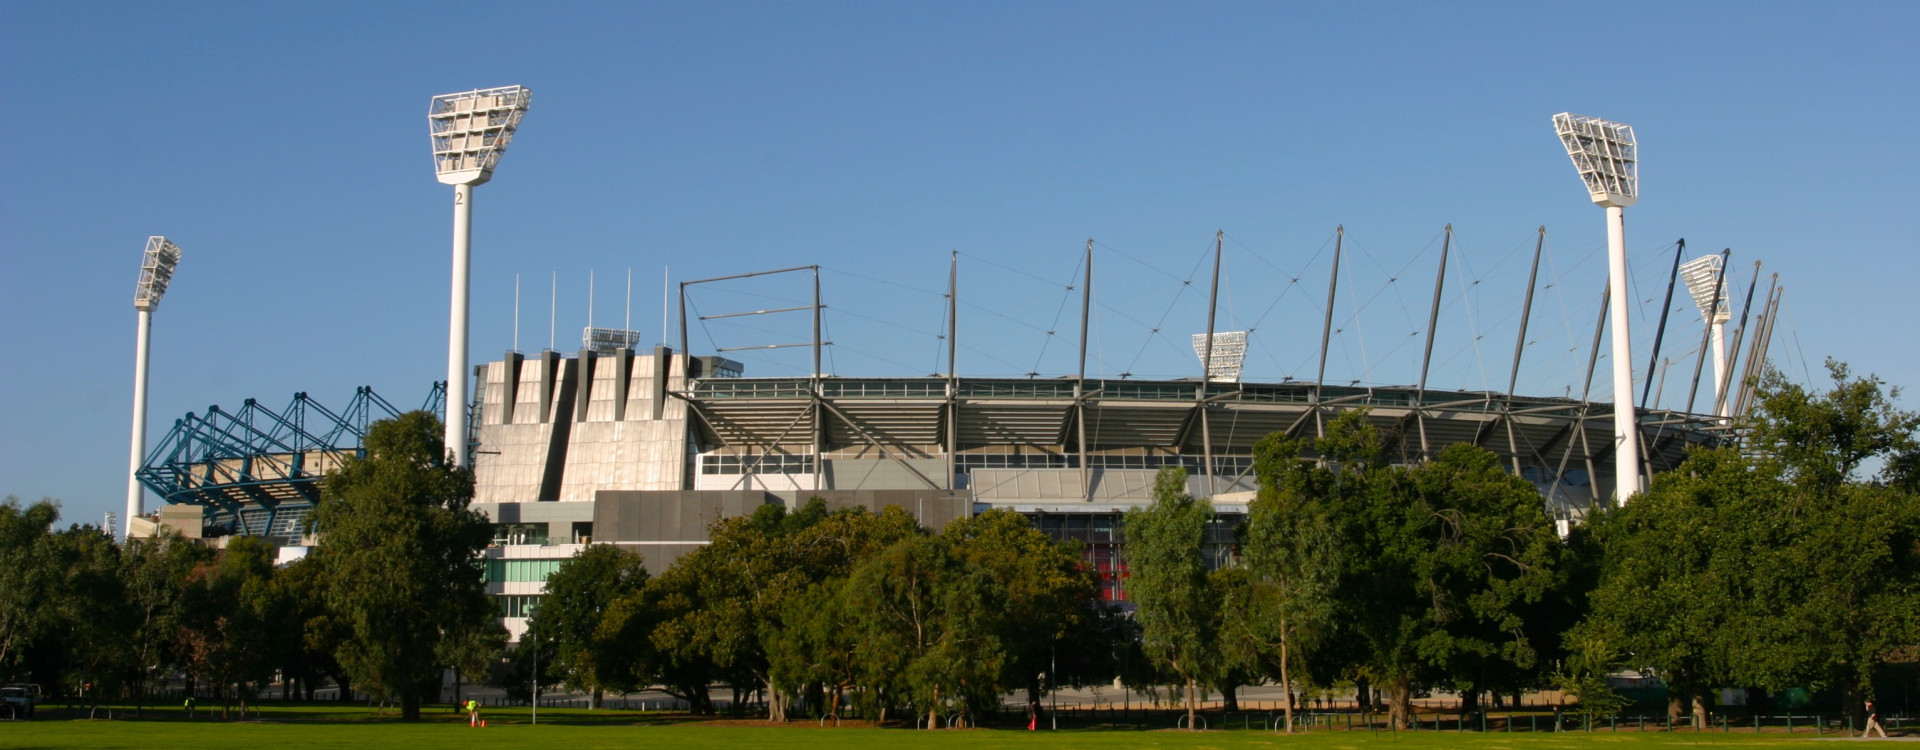 Melbourne is known as Australia’s sporting capital. The MCG and Australian Open are at your doorstep